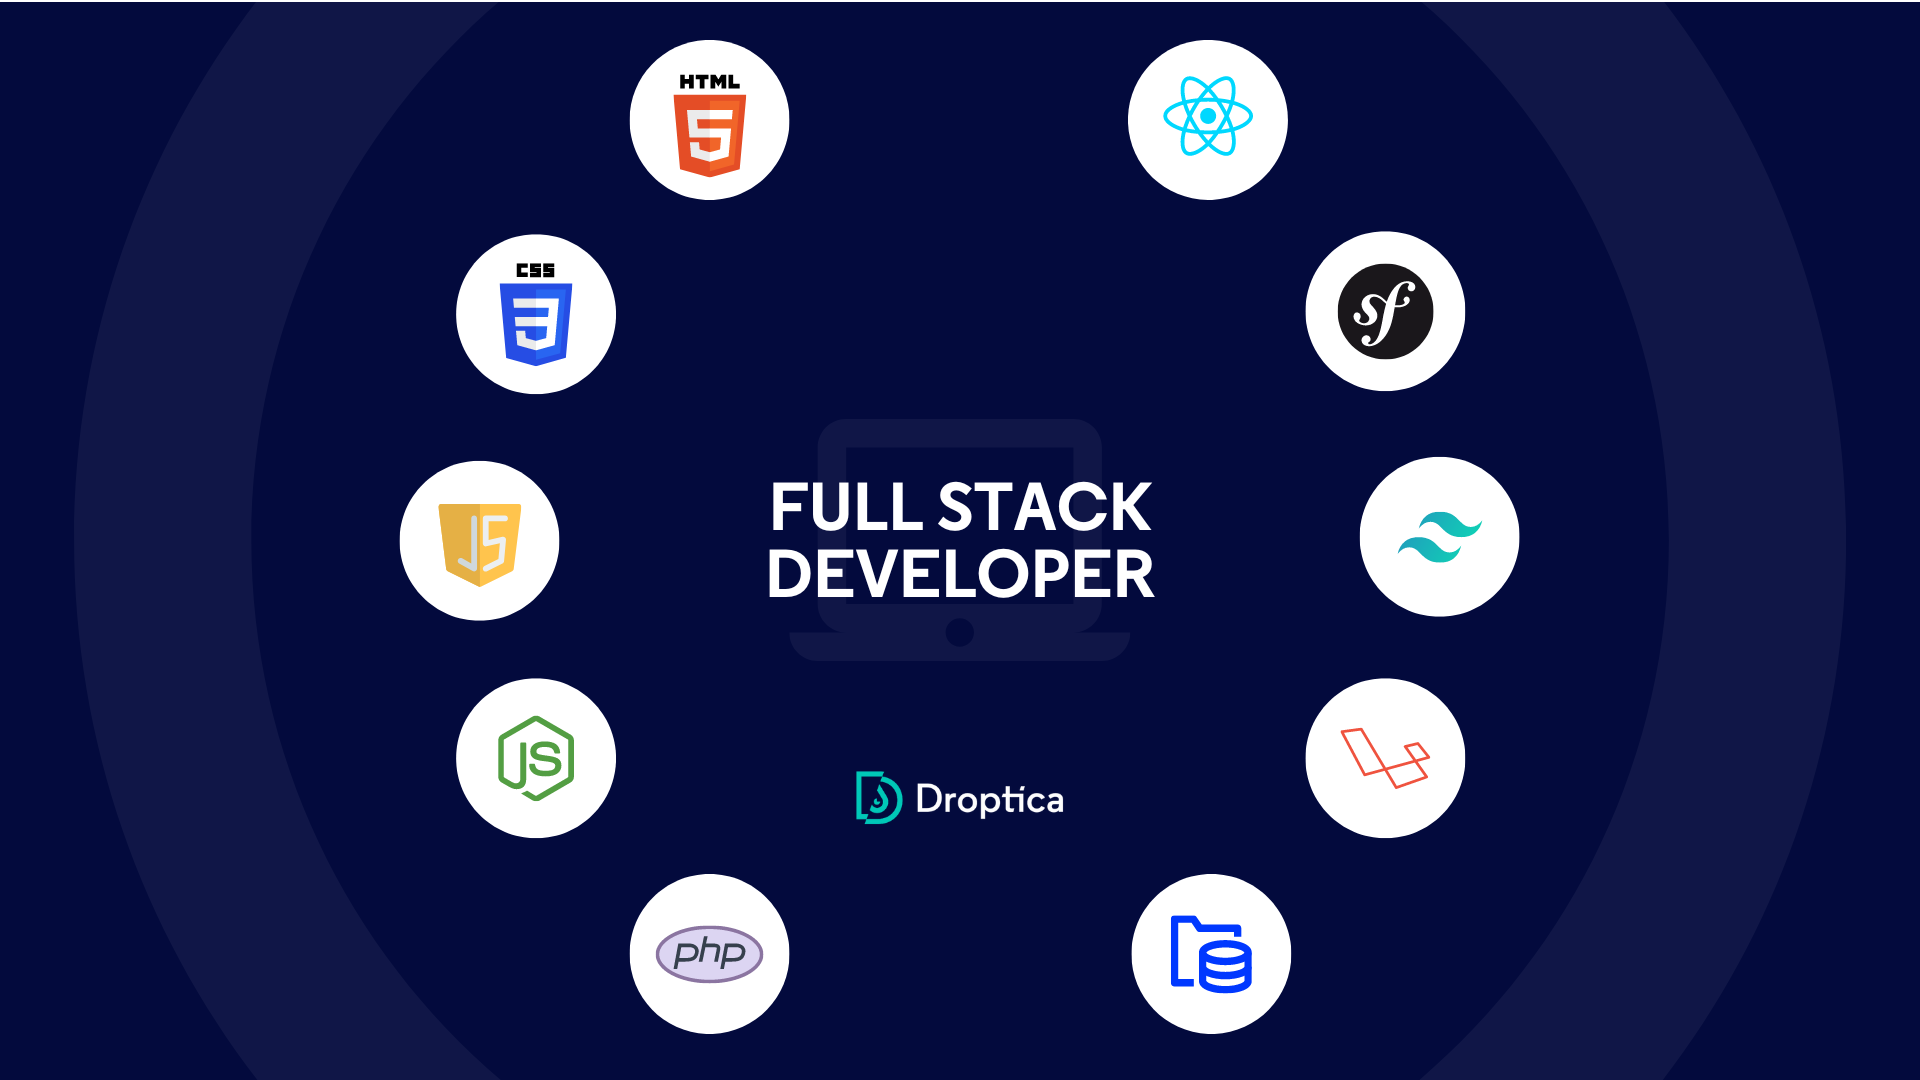 Full stack developer works with various programming technologies such as CSS, JavaScript, and PHP.